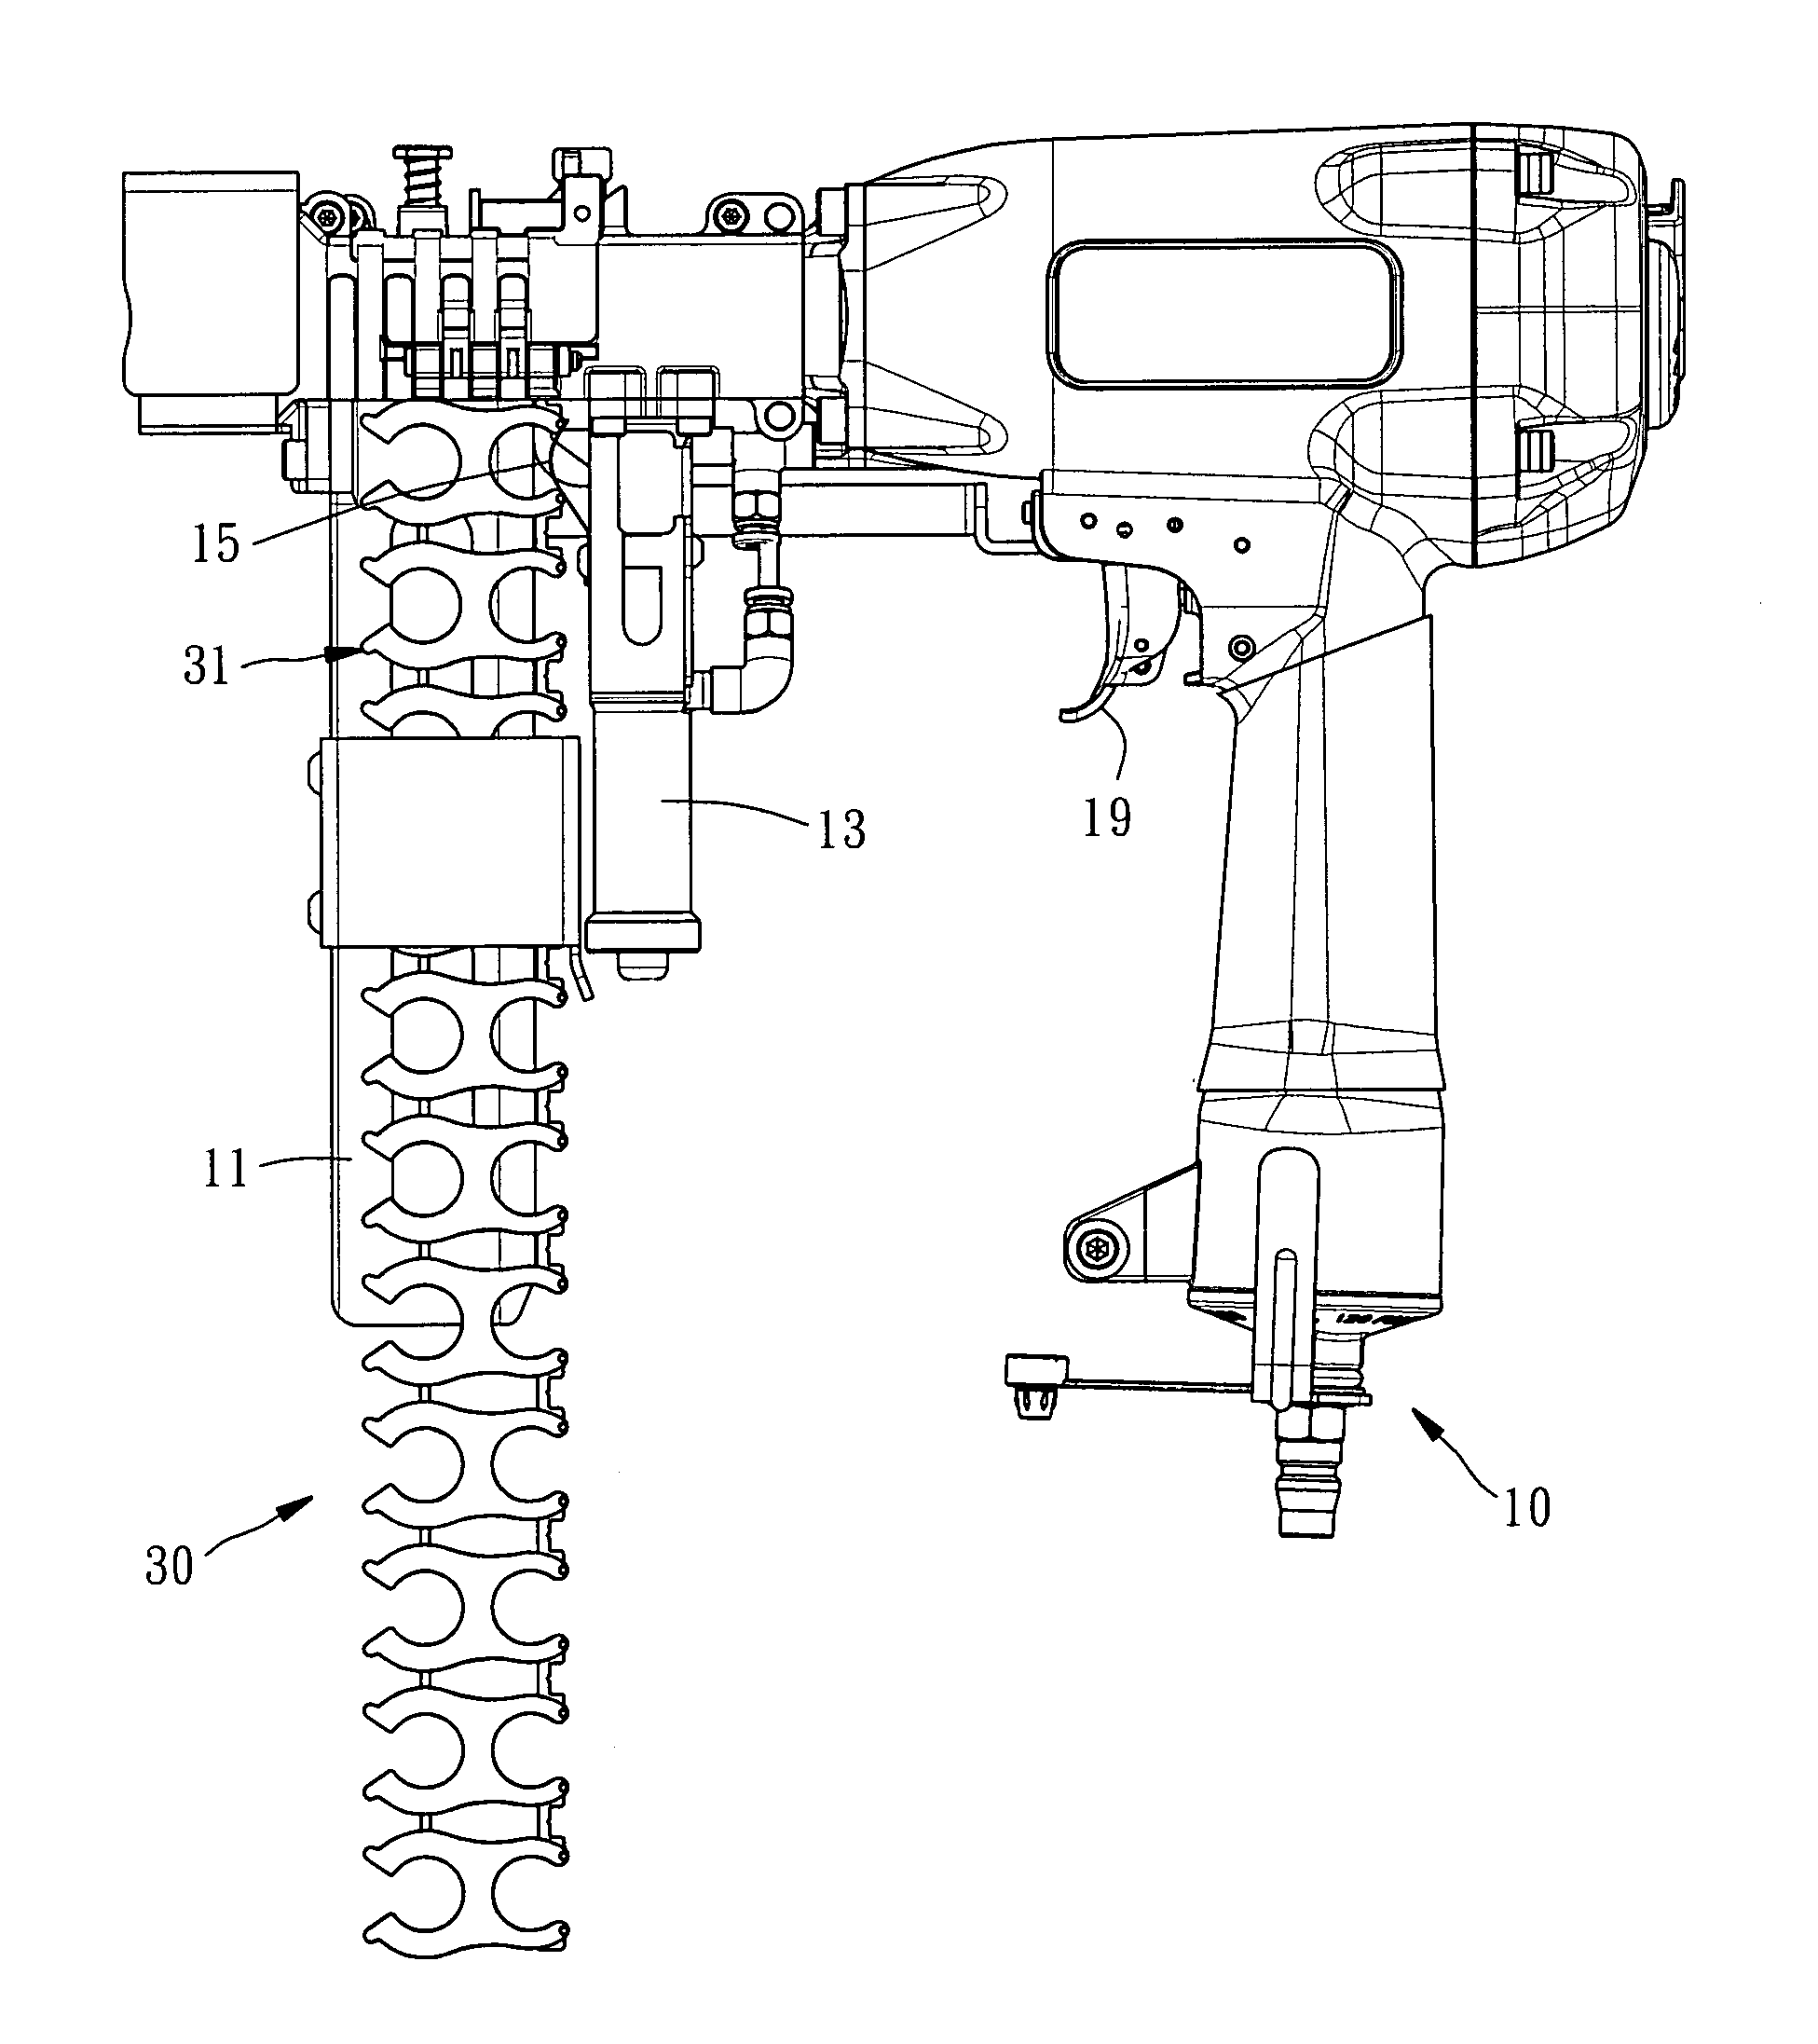 Method of continuously mounting clips to two abutted and crossed rods